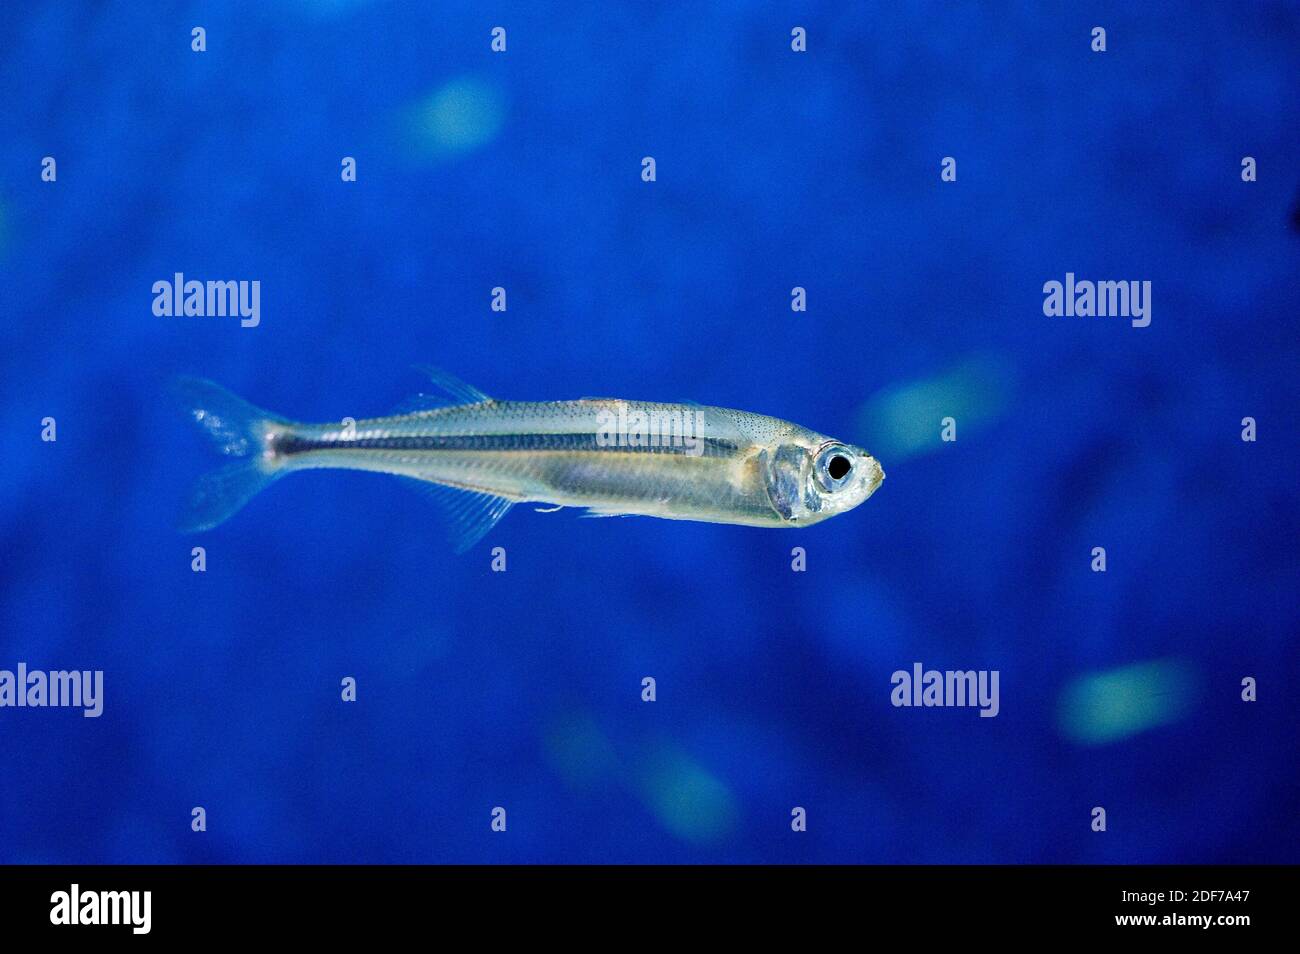 European anchovy (Engraulis encrasicolus) is a marine fish native to Mediterranean Sea and Europe and Africa coasts. Stock Photo